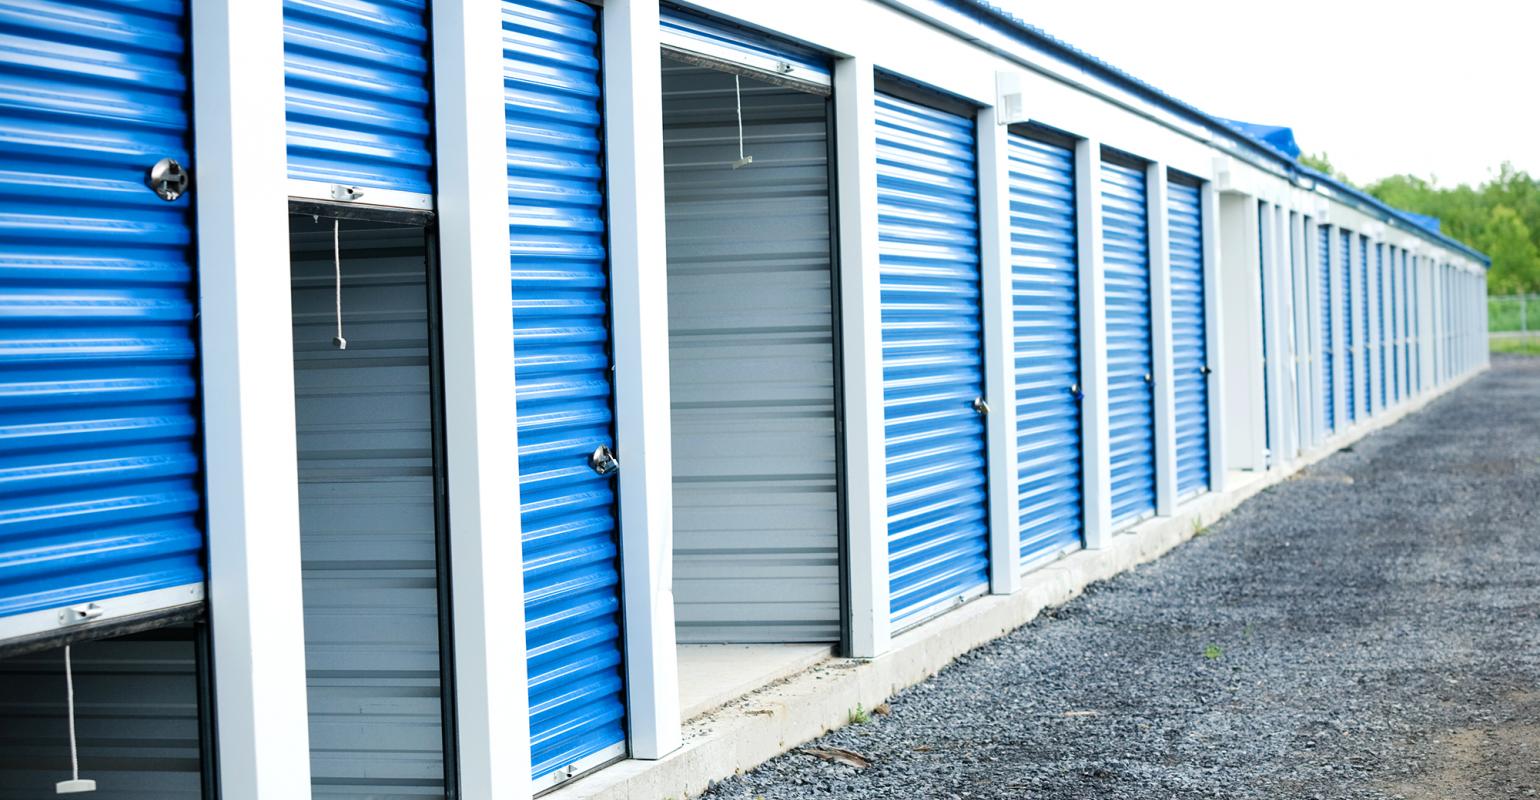 Selling Your Self-Storage Property: Should You Hire a Broker?